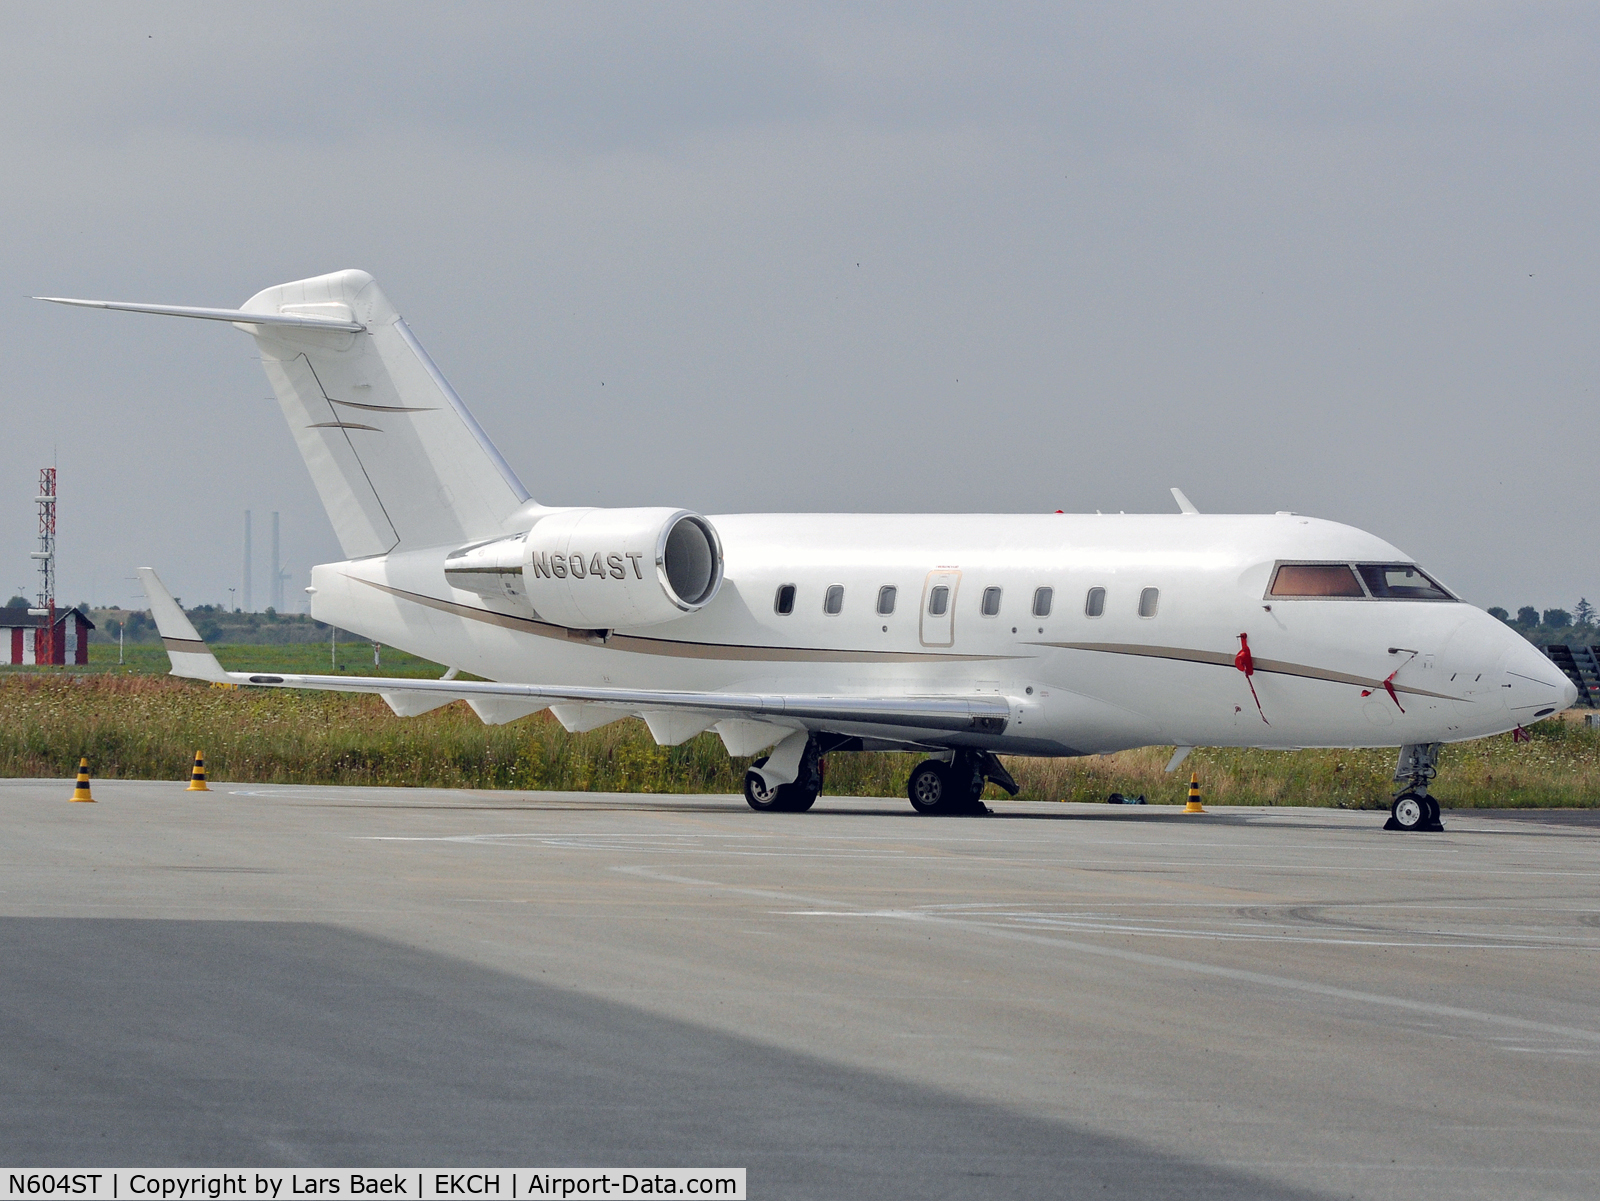 N604ST, 2000 Bombardier Challenger 604 (CL-600-2B16) C/N 5479, Parked